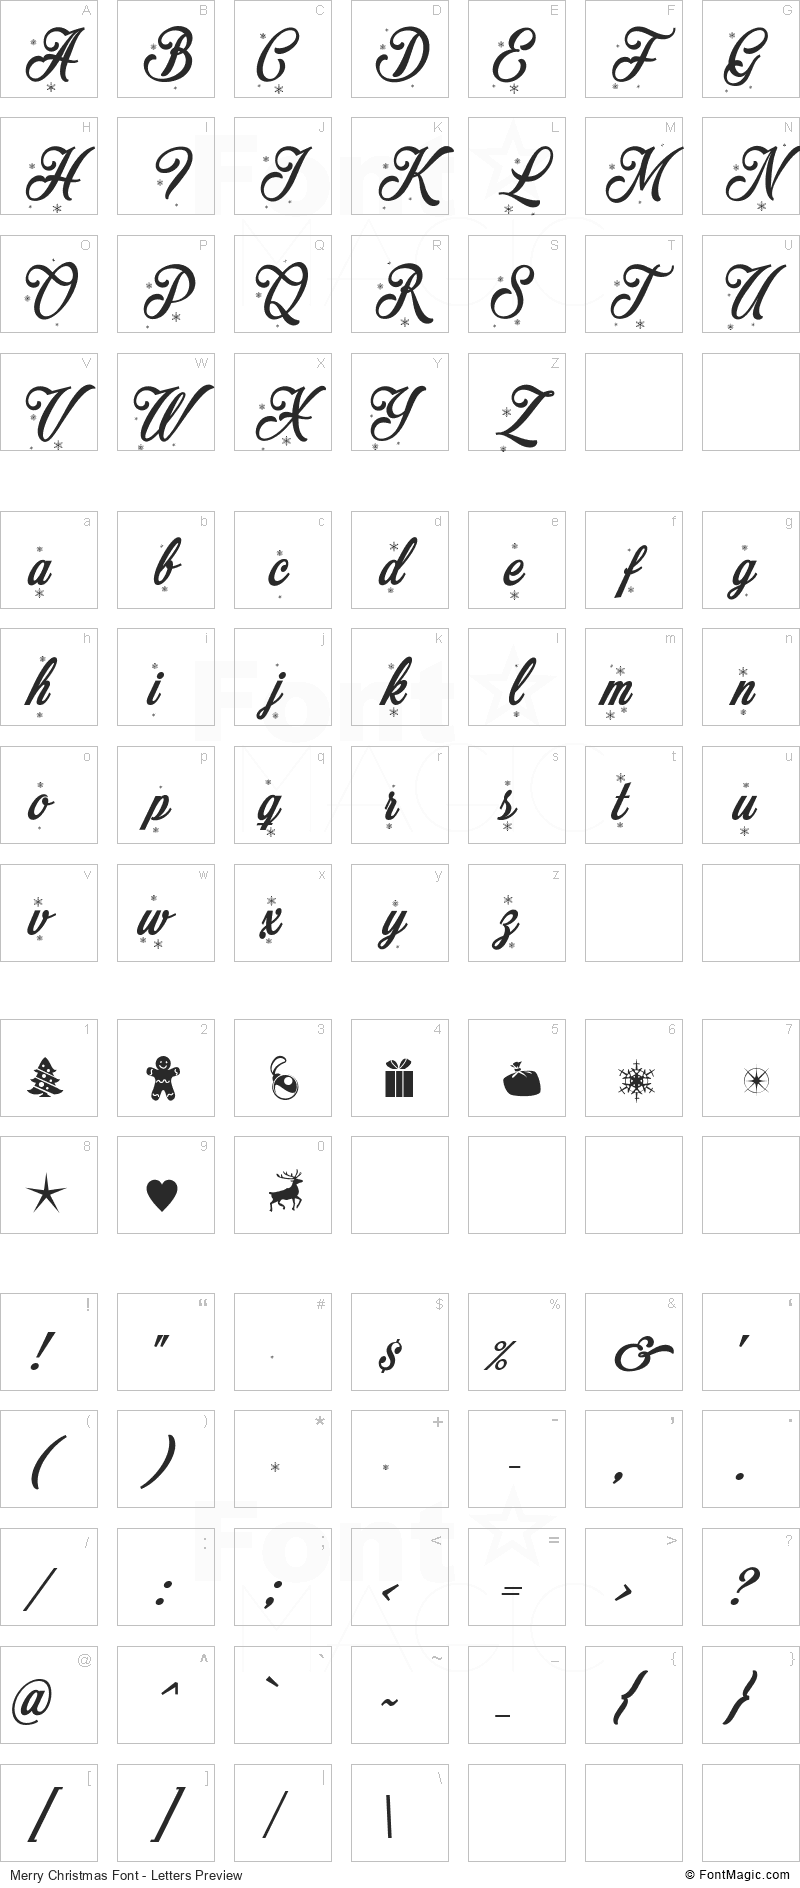 Merry Christmas Font - All Latters Preview Chart